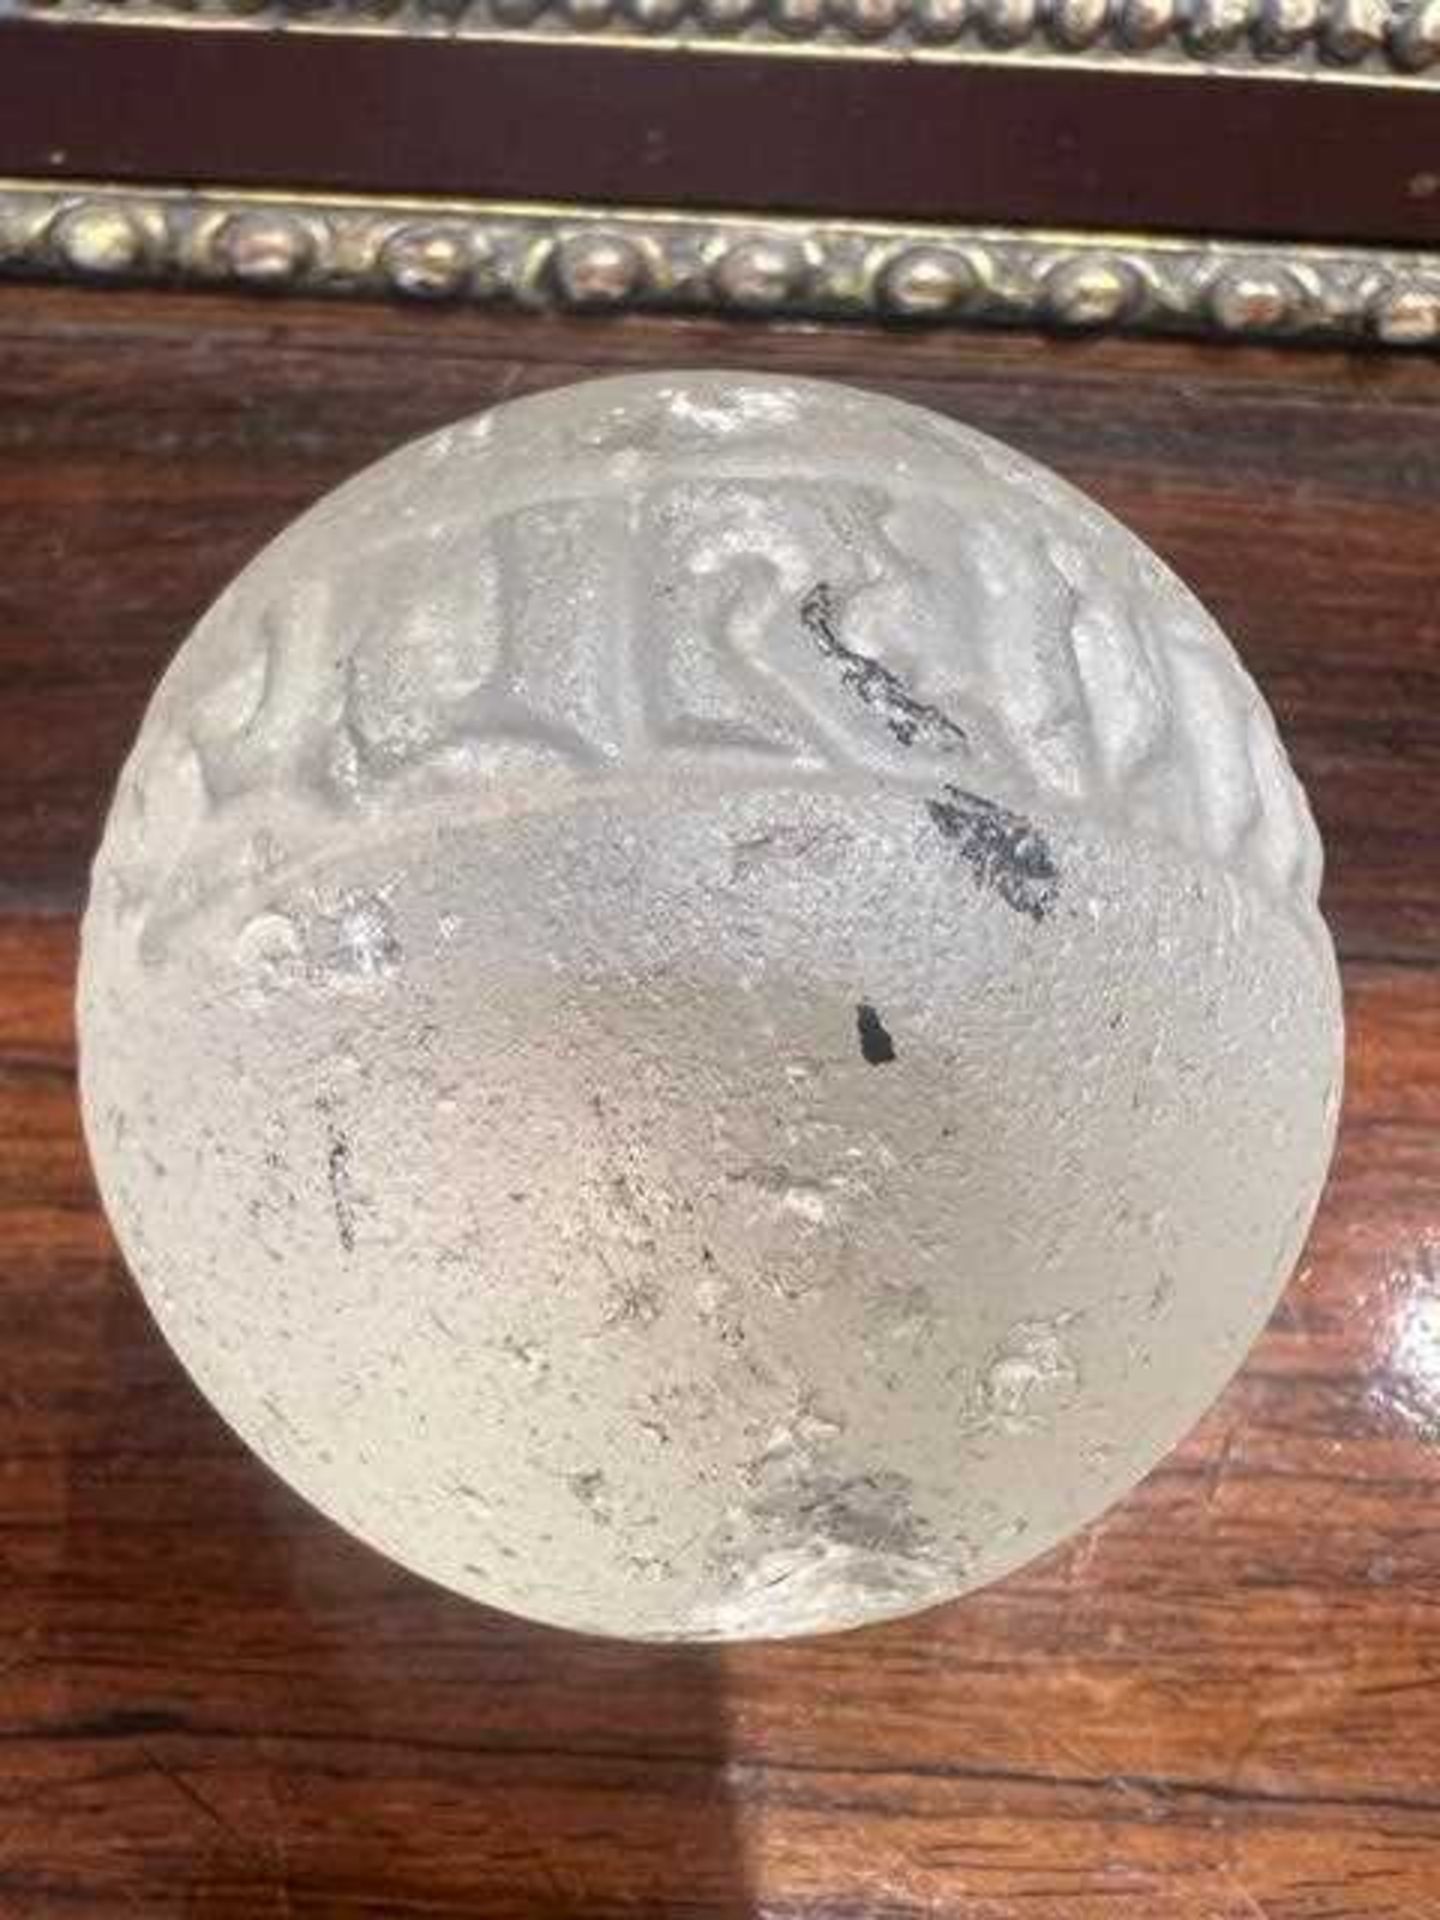 AN ISLAMIC SOLID GLASS SPHERE - Image 13 of 15